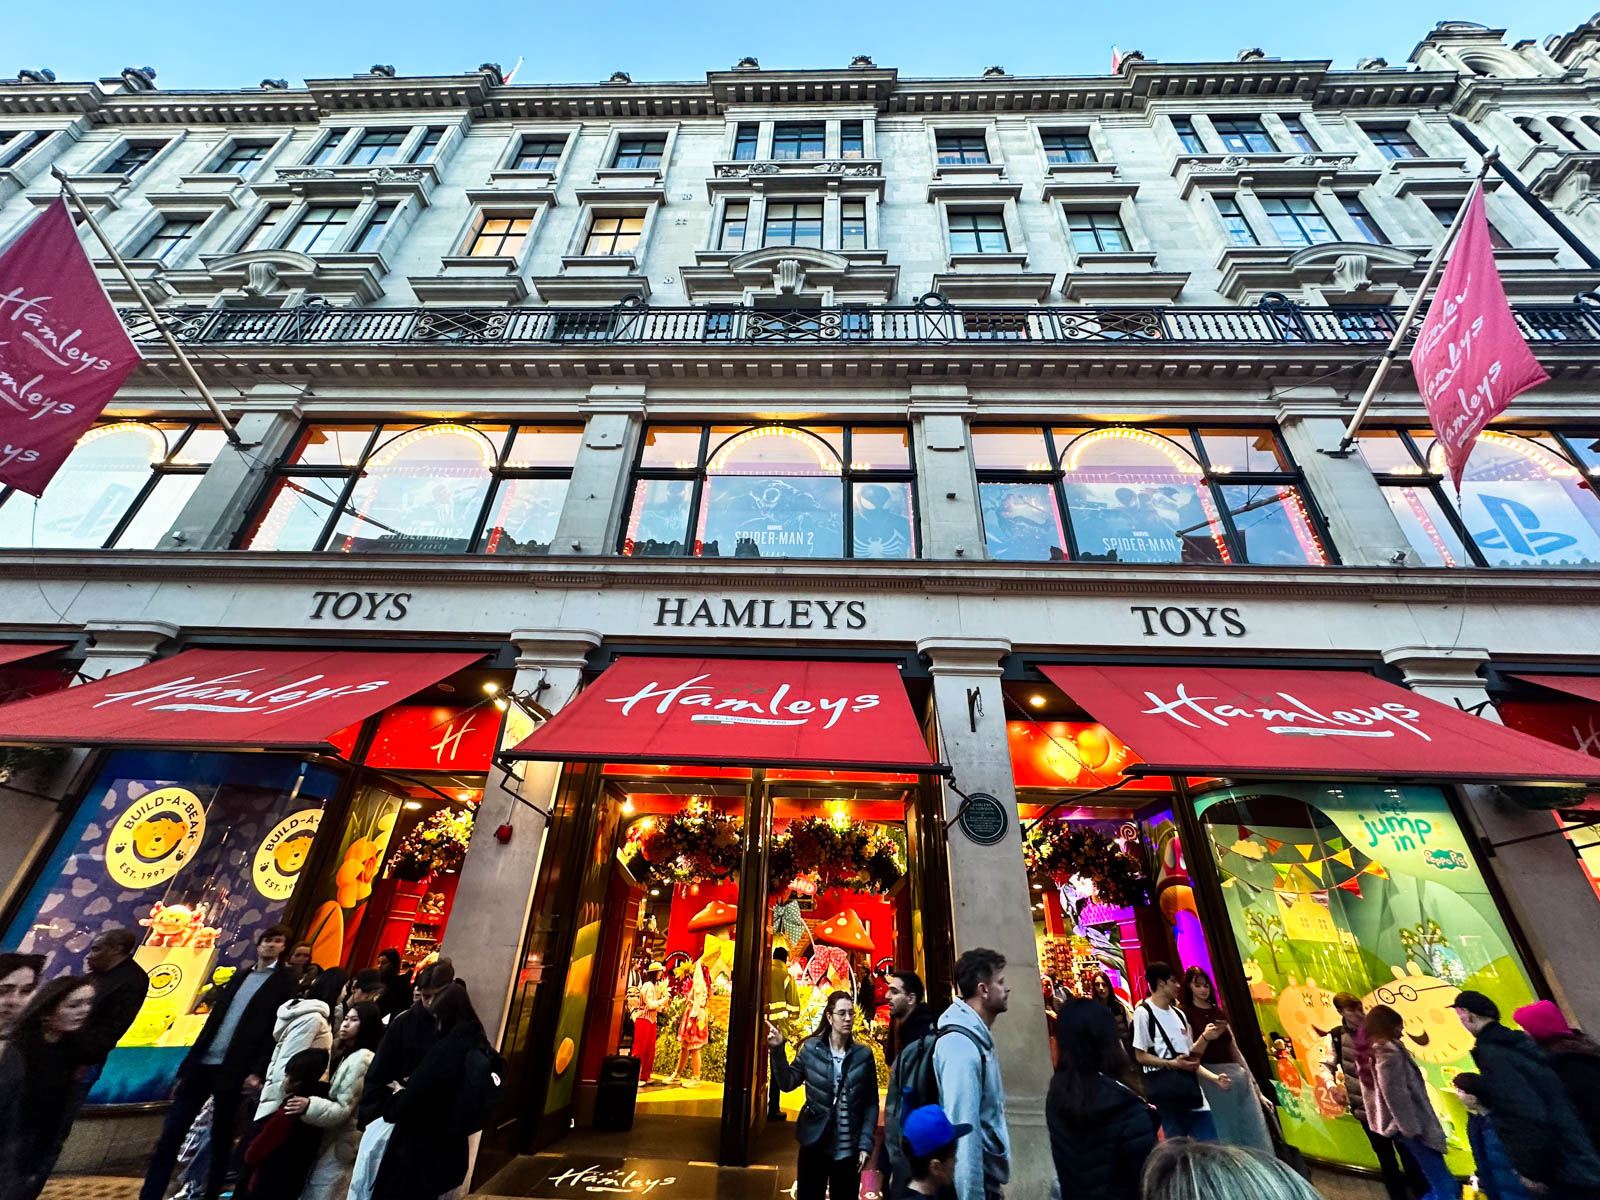 The red awnings outside Hamleys shop